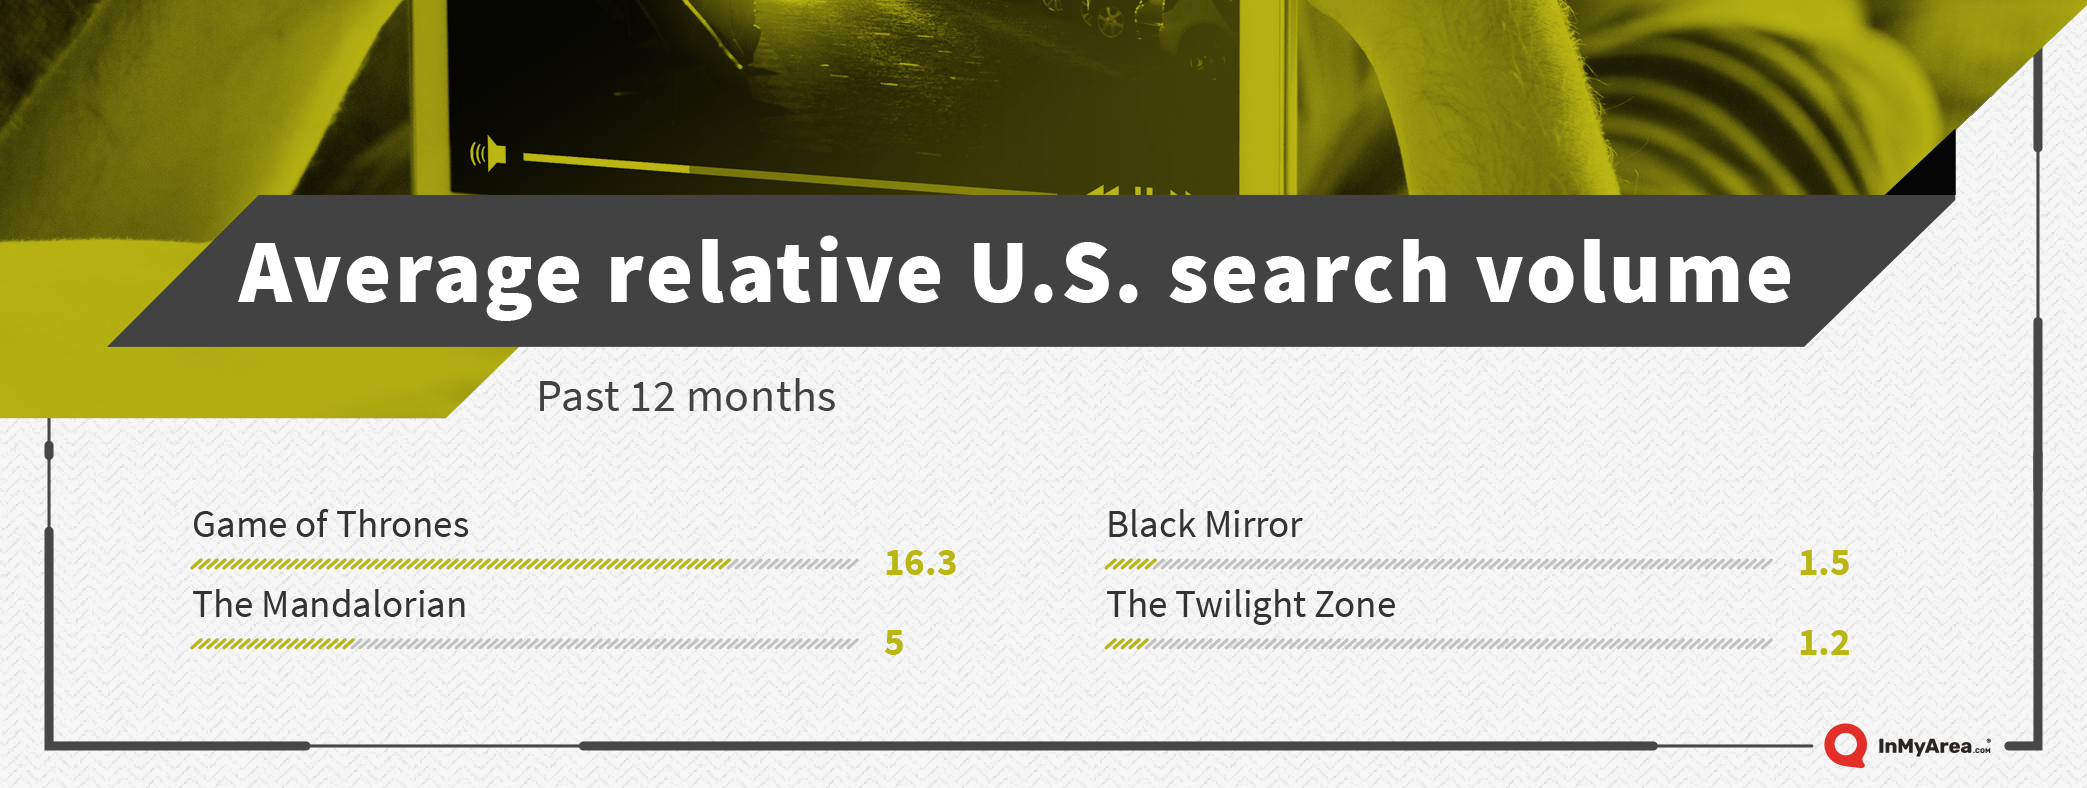 Part 2 - Average relative U.S. shows search volume for the past 12 months